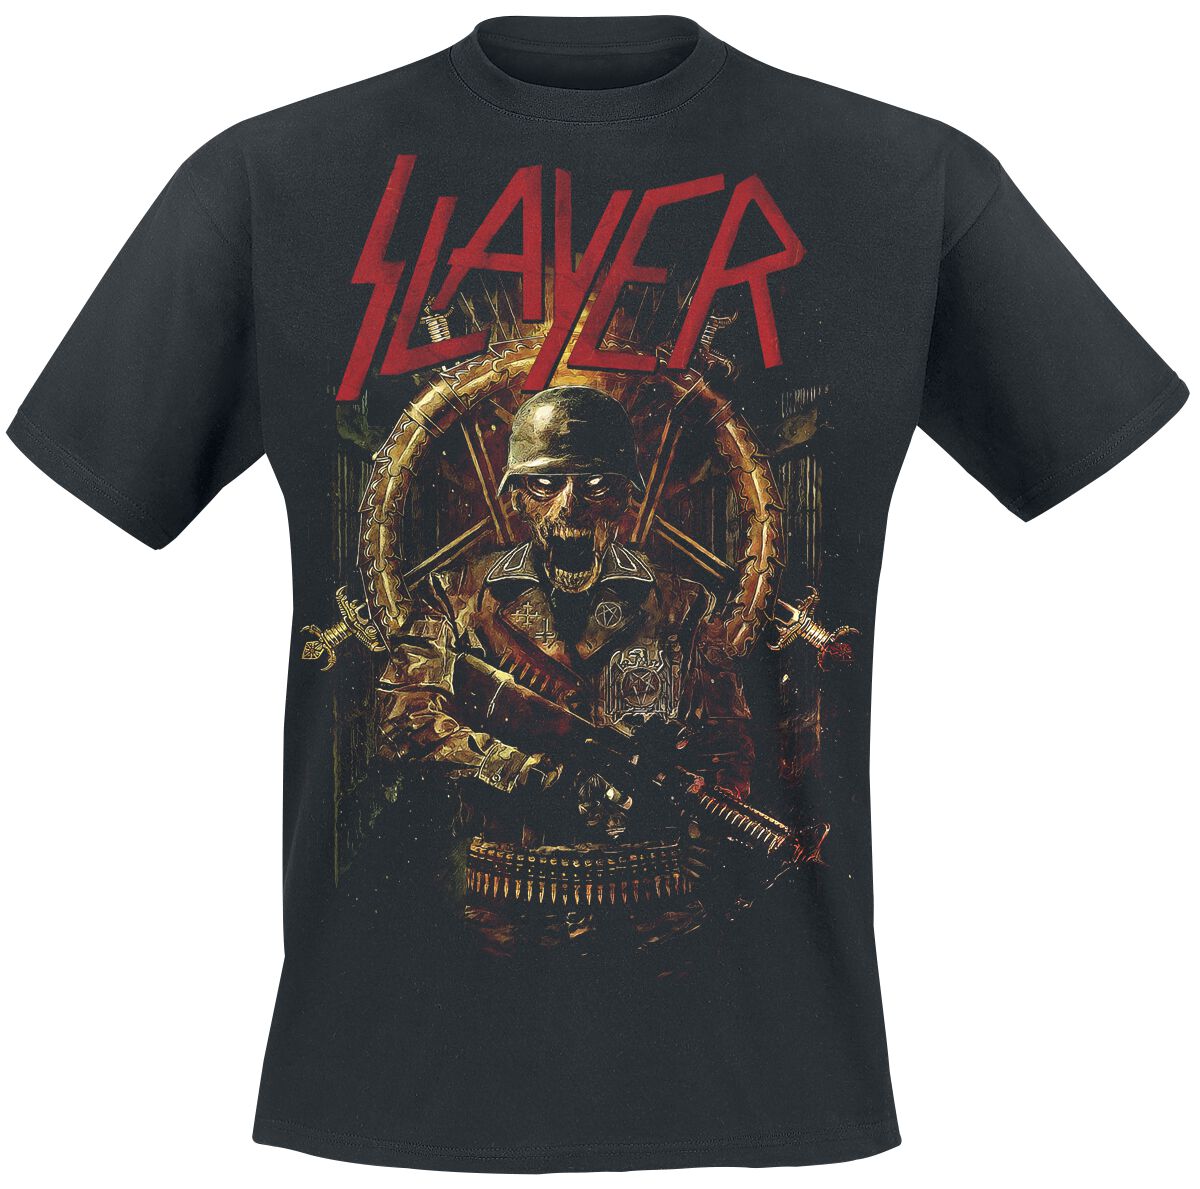 Image of Slayer Comic Book Cover T-Shirt schwarz